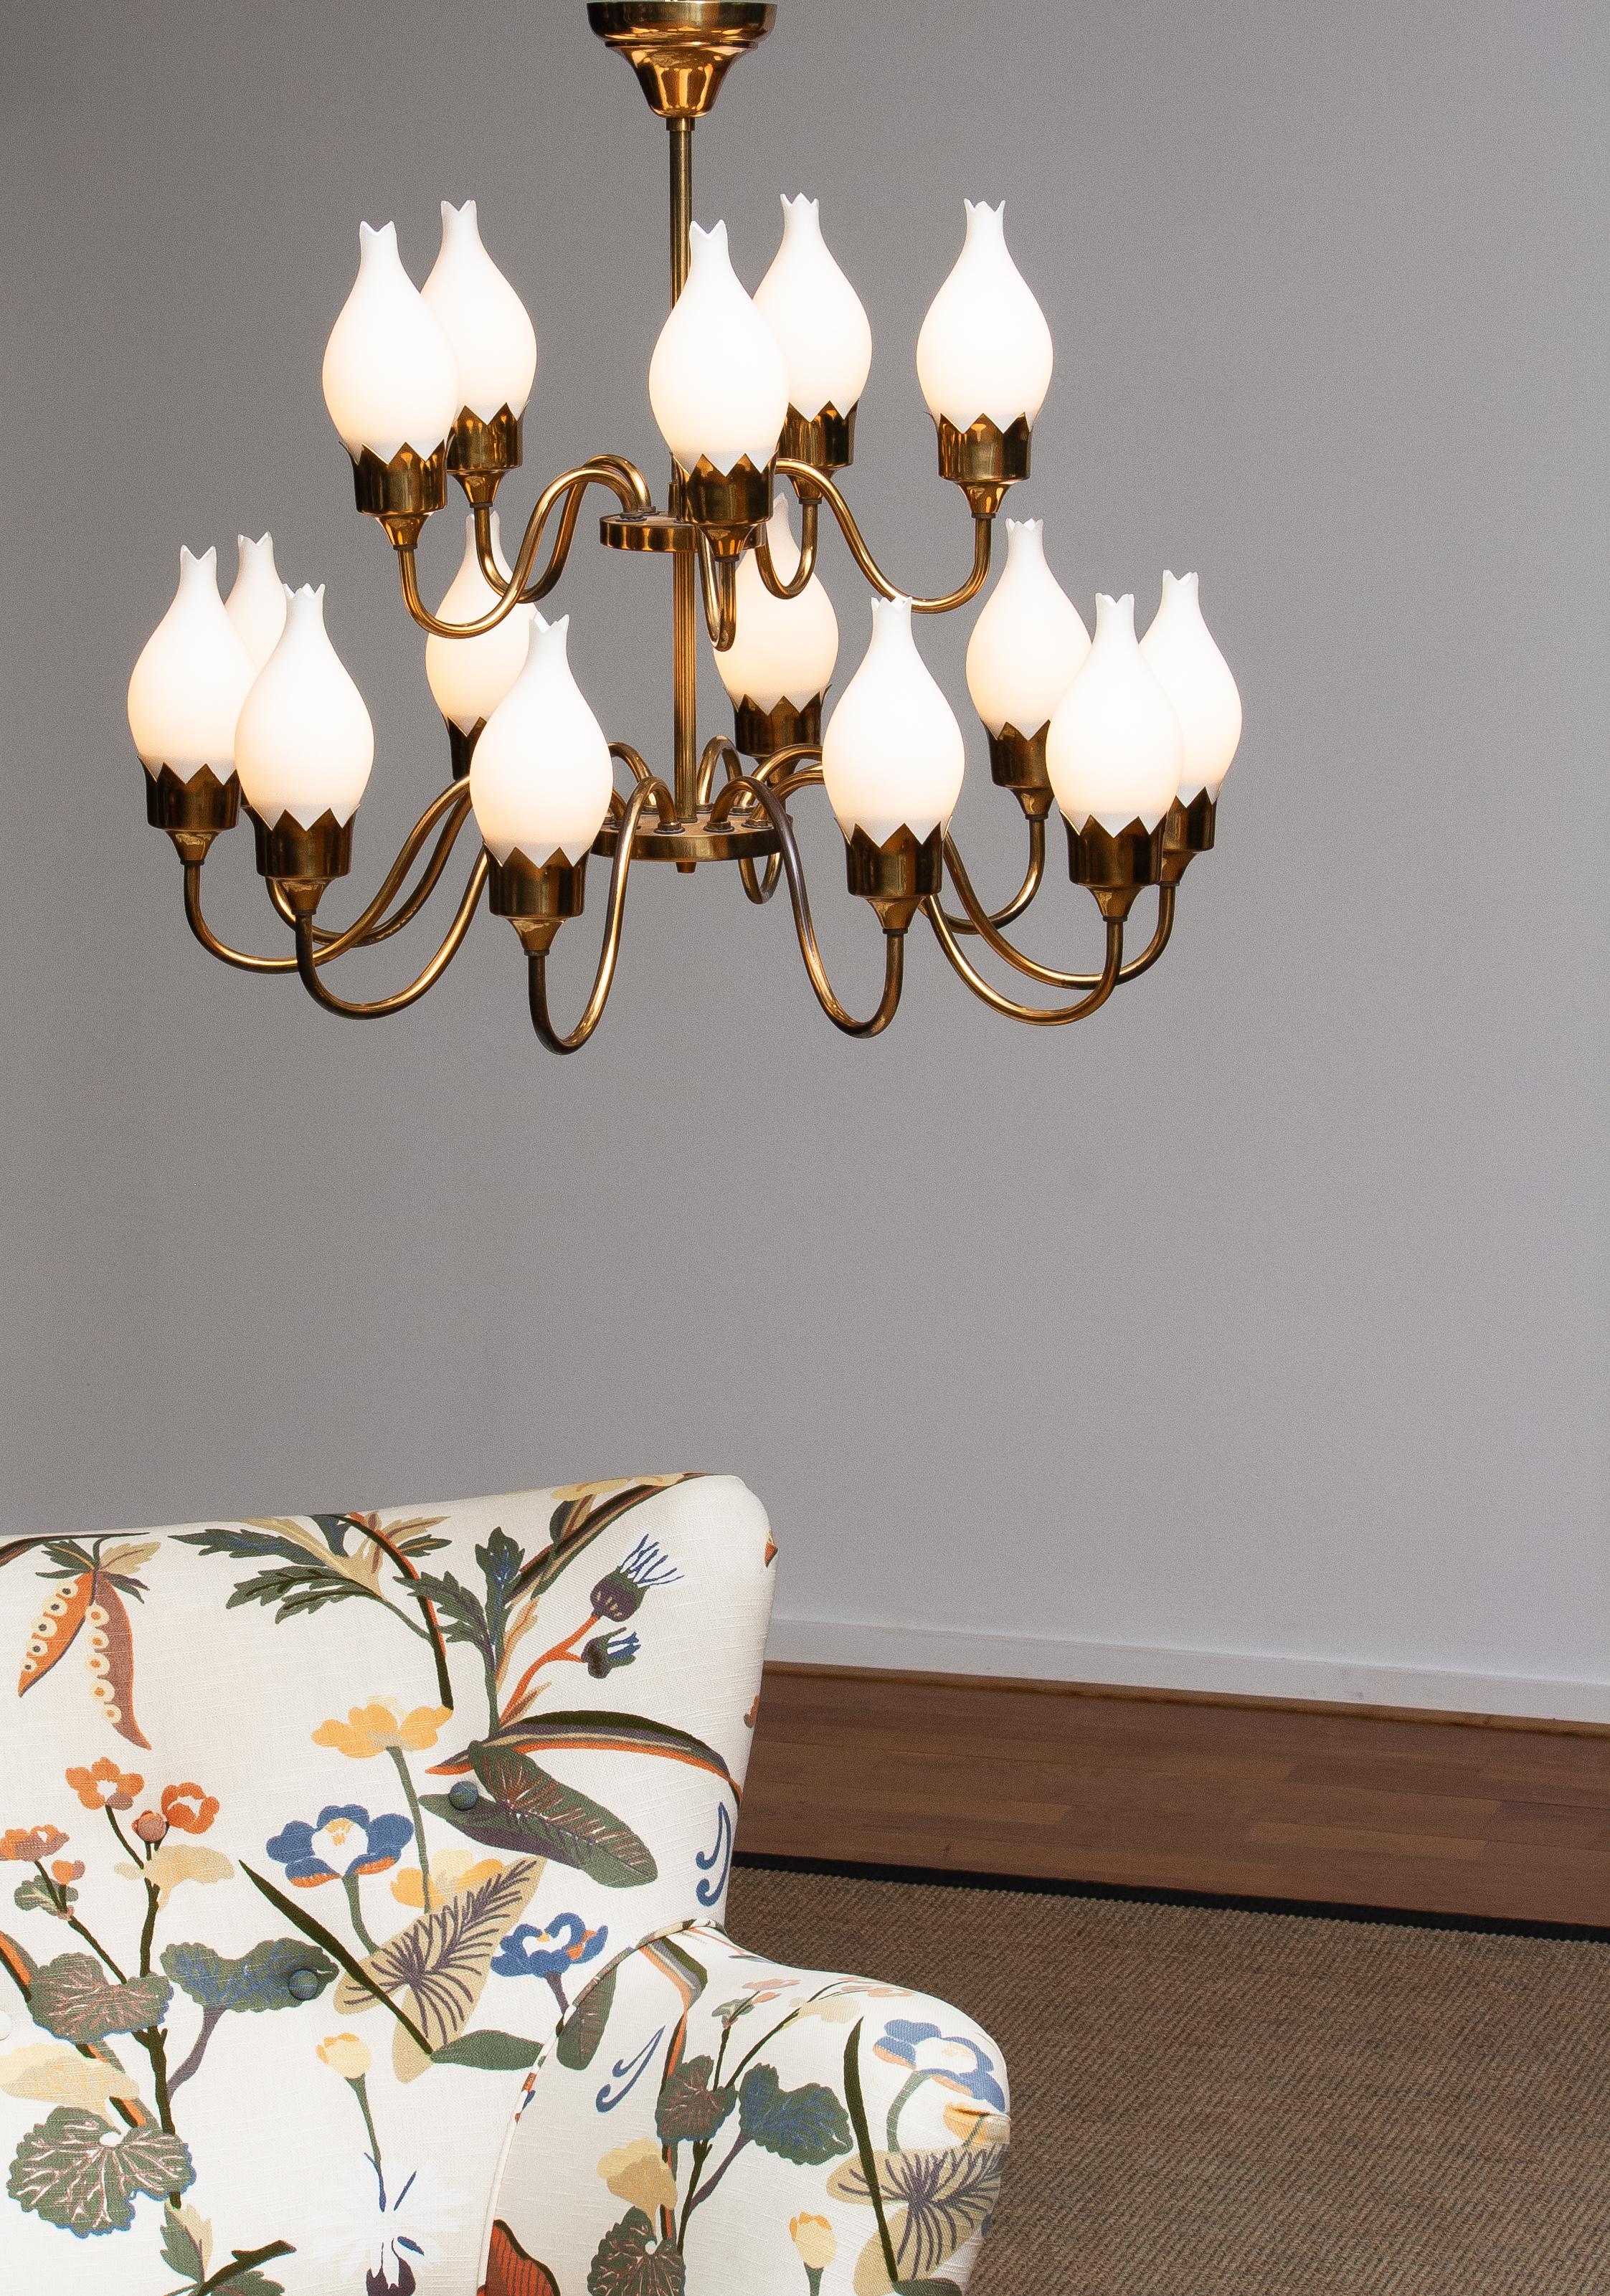 1950s, Brass and White Glass Opaline Arm Chandelier by Fog & Mørup with Tulips 3